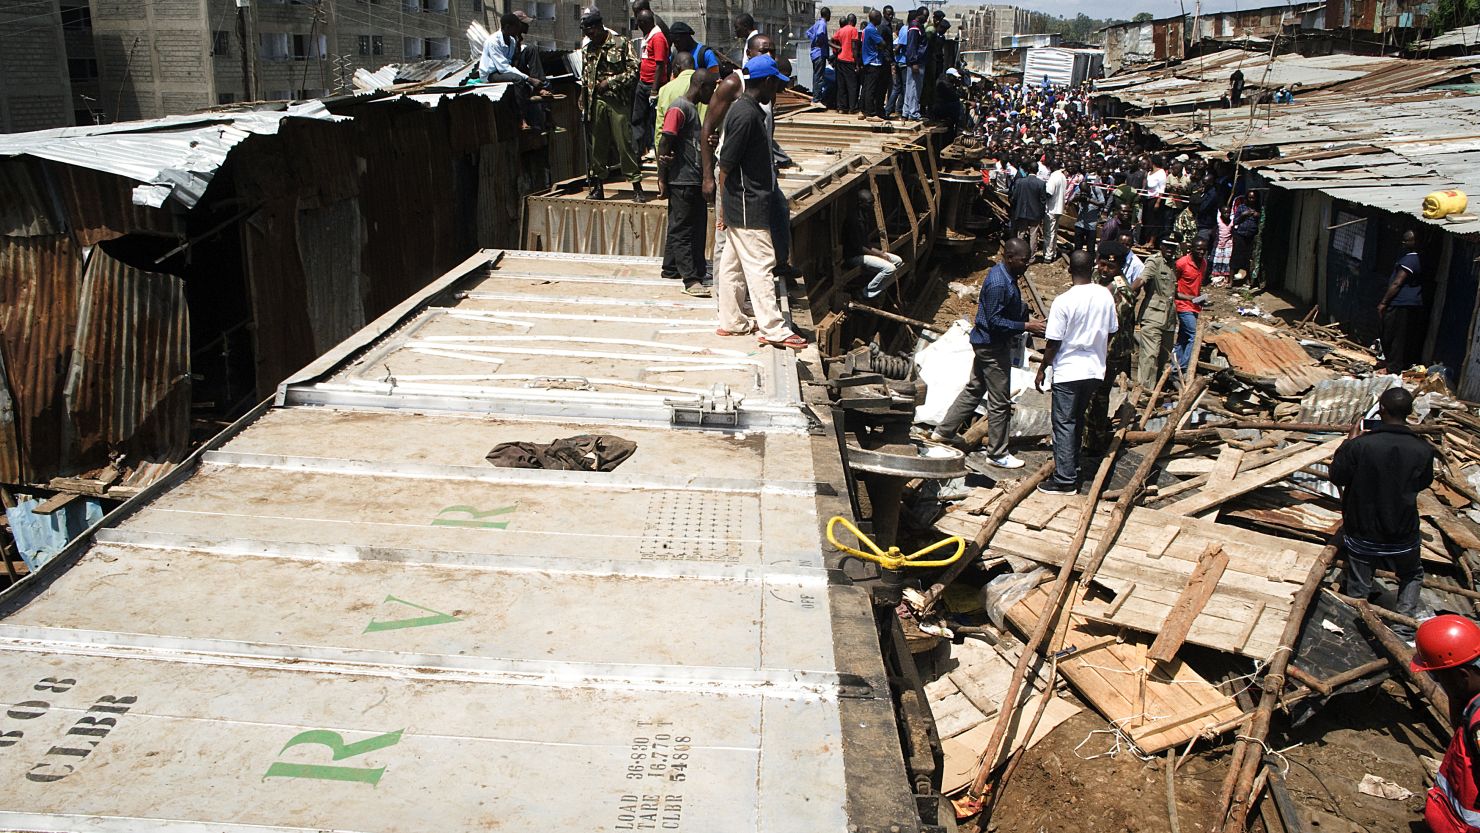 People stand on a cargo train after it derailed in the sprawling Nairobi slum of Kibera.